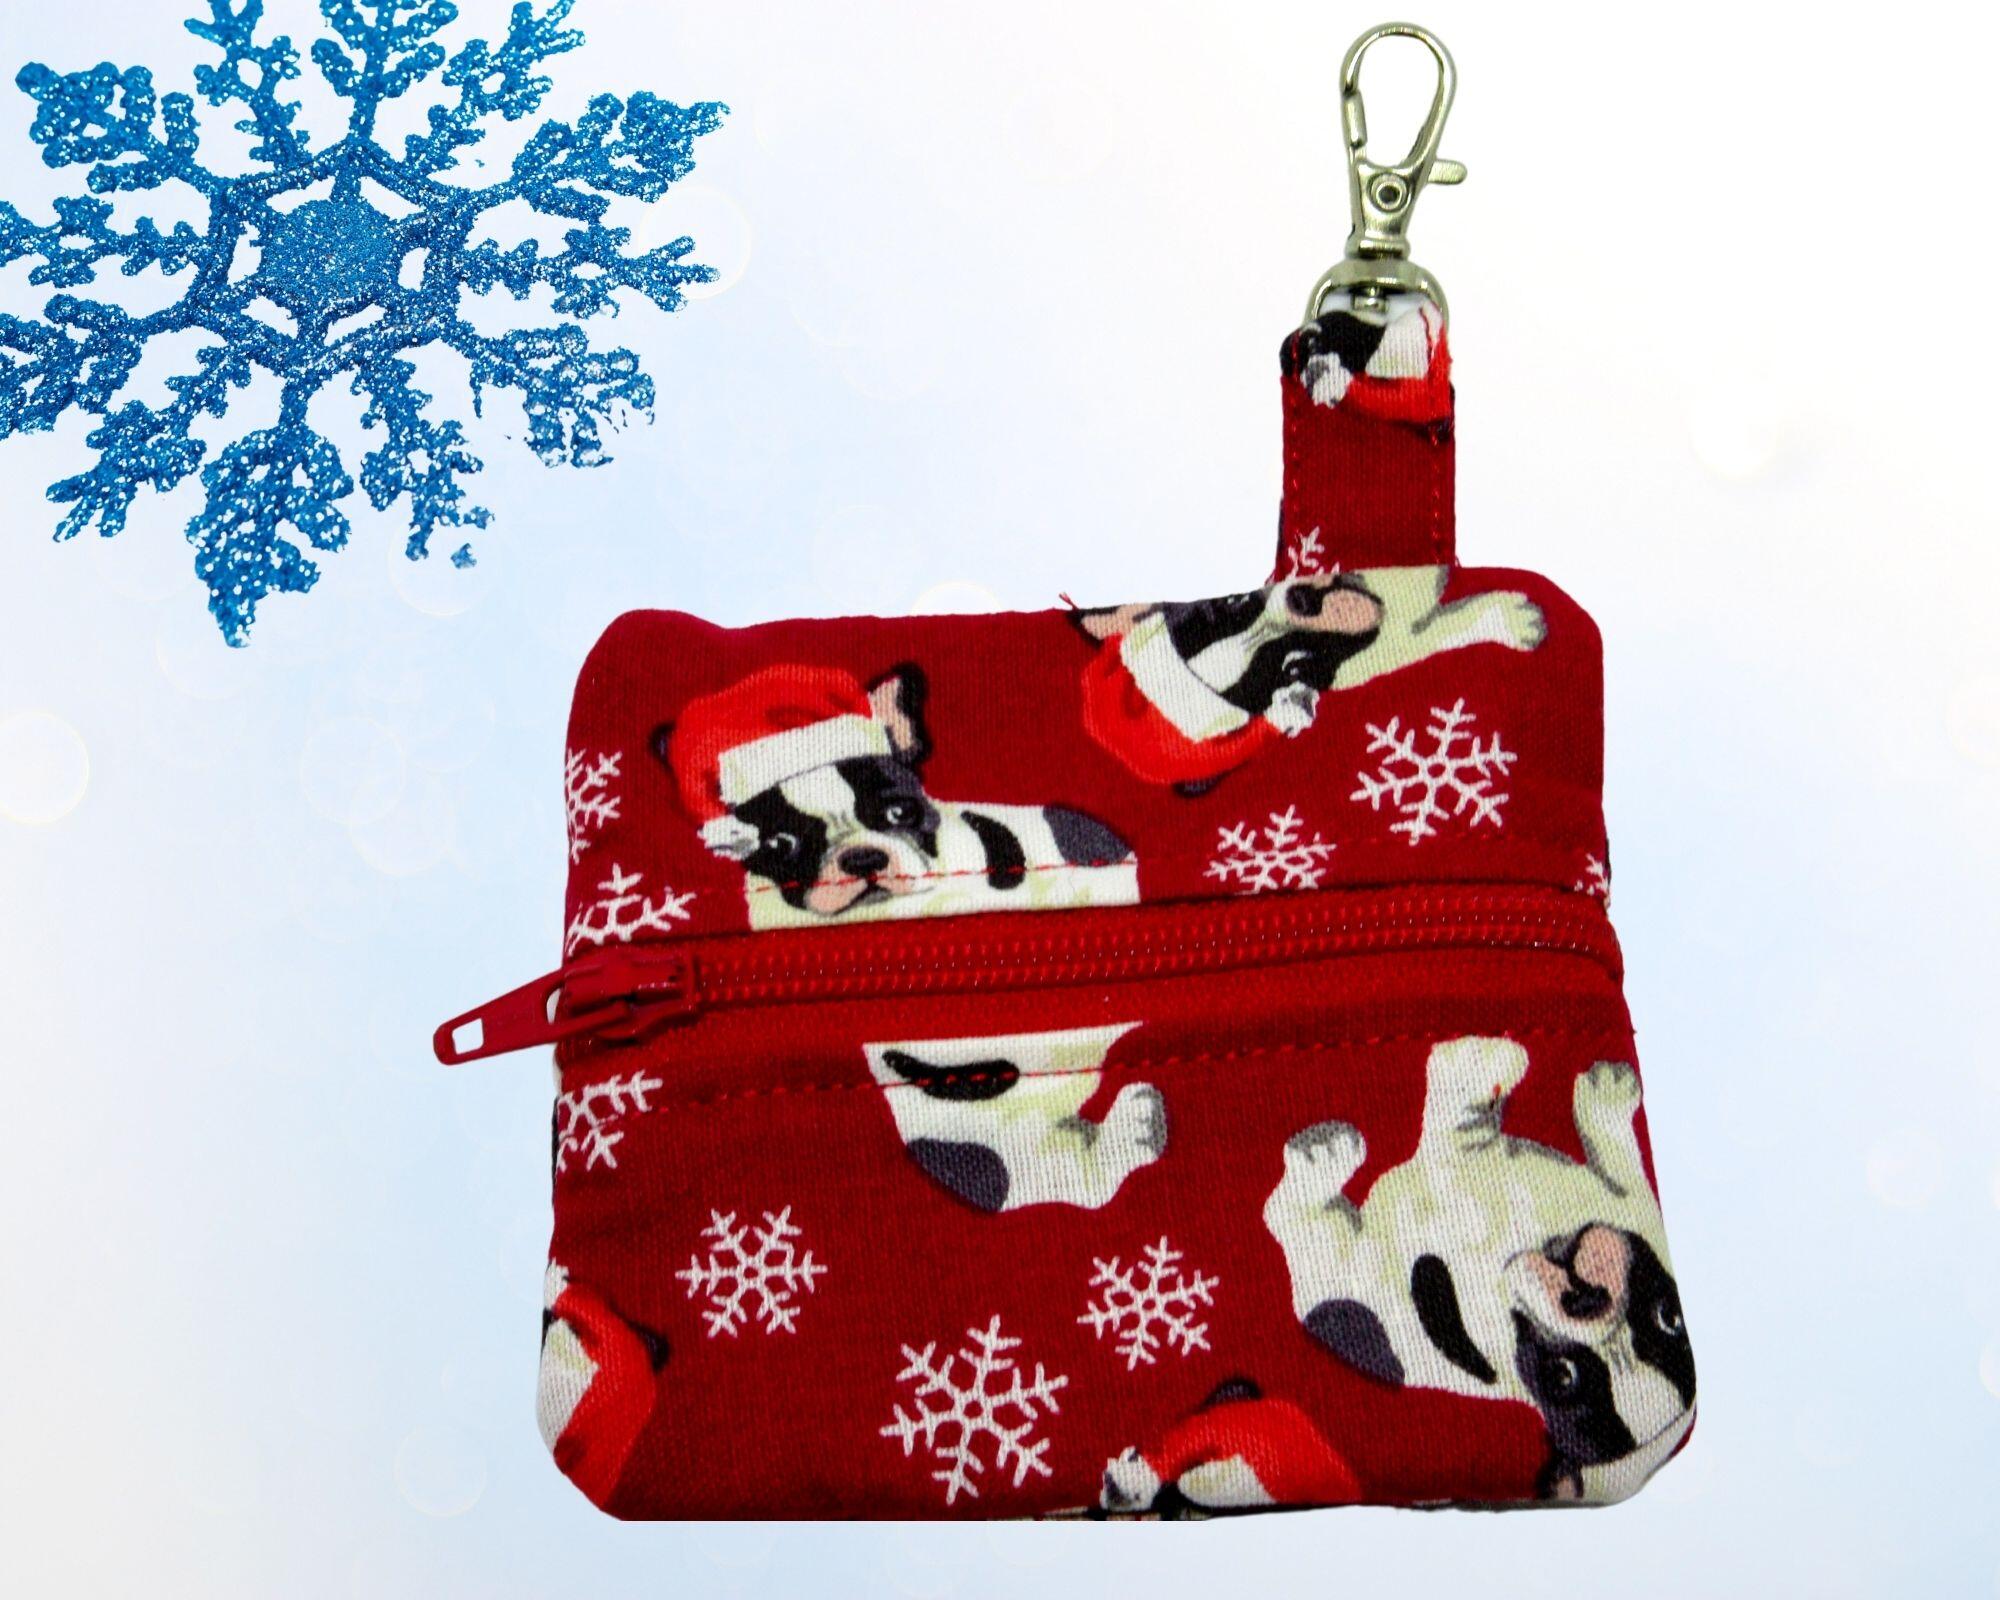 French Bulldogs in Santa Hats with Snowflakes print print dog poop bag or training treat pouch hand made in USA by A FurBaby Favorite